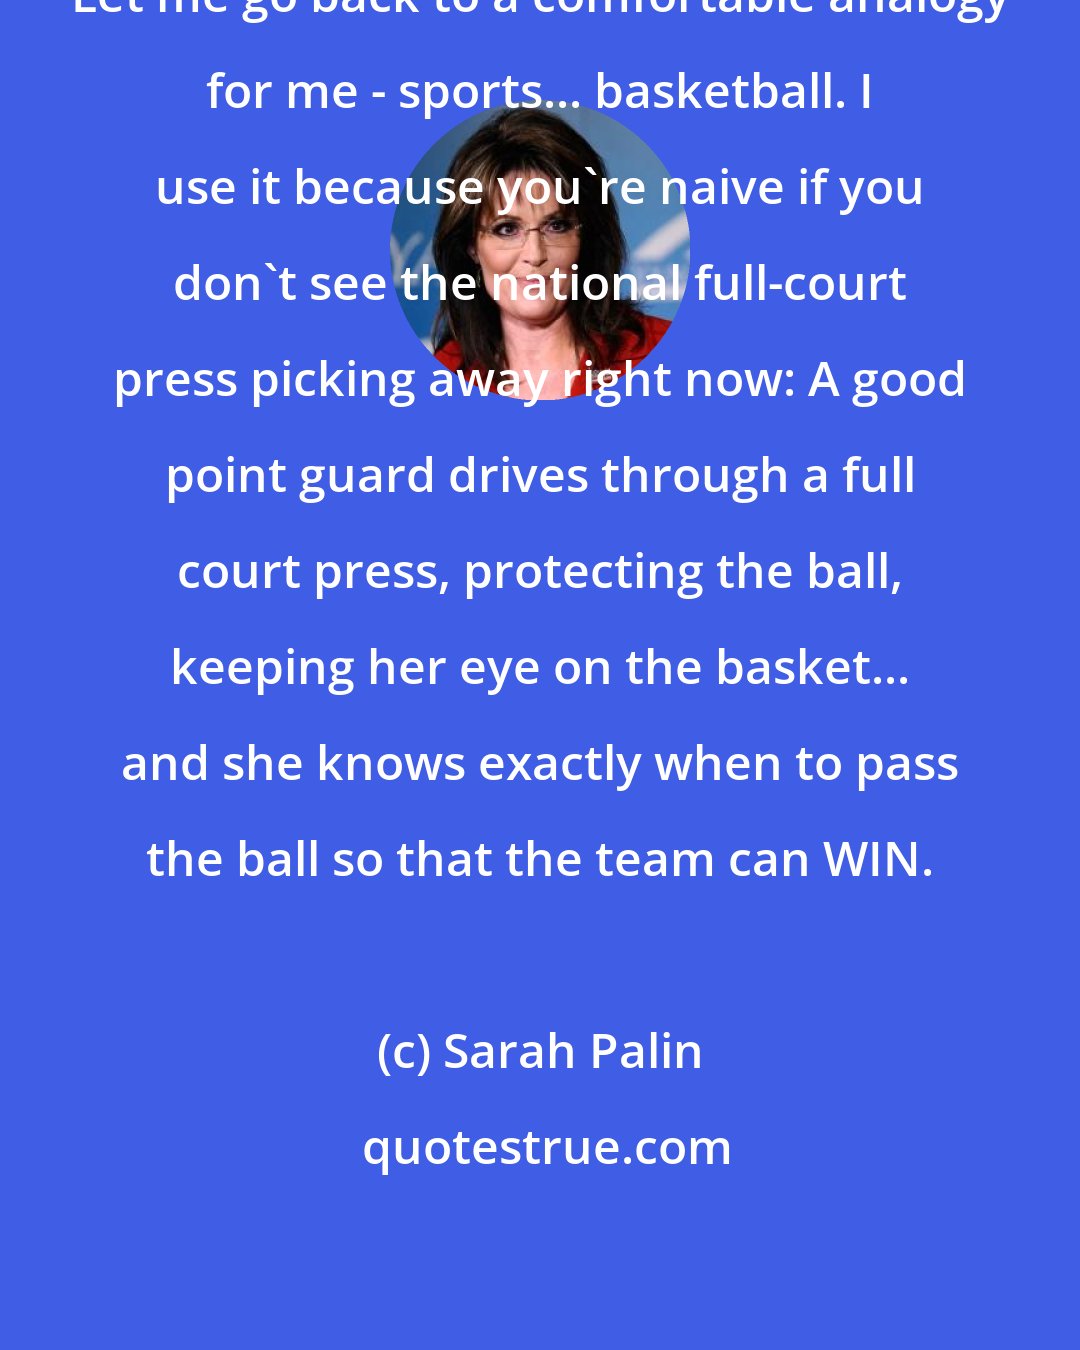 Sarah Palin: Let me go back to a comfortable analogy for me - sports... basketball. I use it because you're naive if you don't see the national full-court press picking away right now: A good point guard drives through a full court press, protecting the ball, keeping her eye on the basket... and she knows exactly when to pass the ball so that the team can WIN.